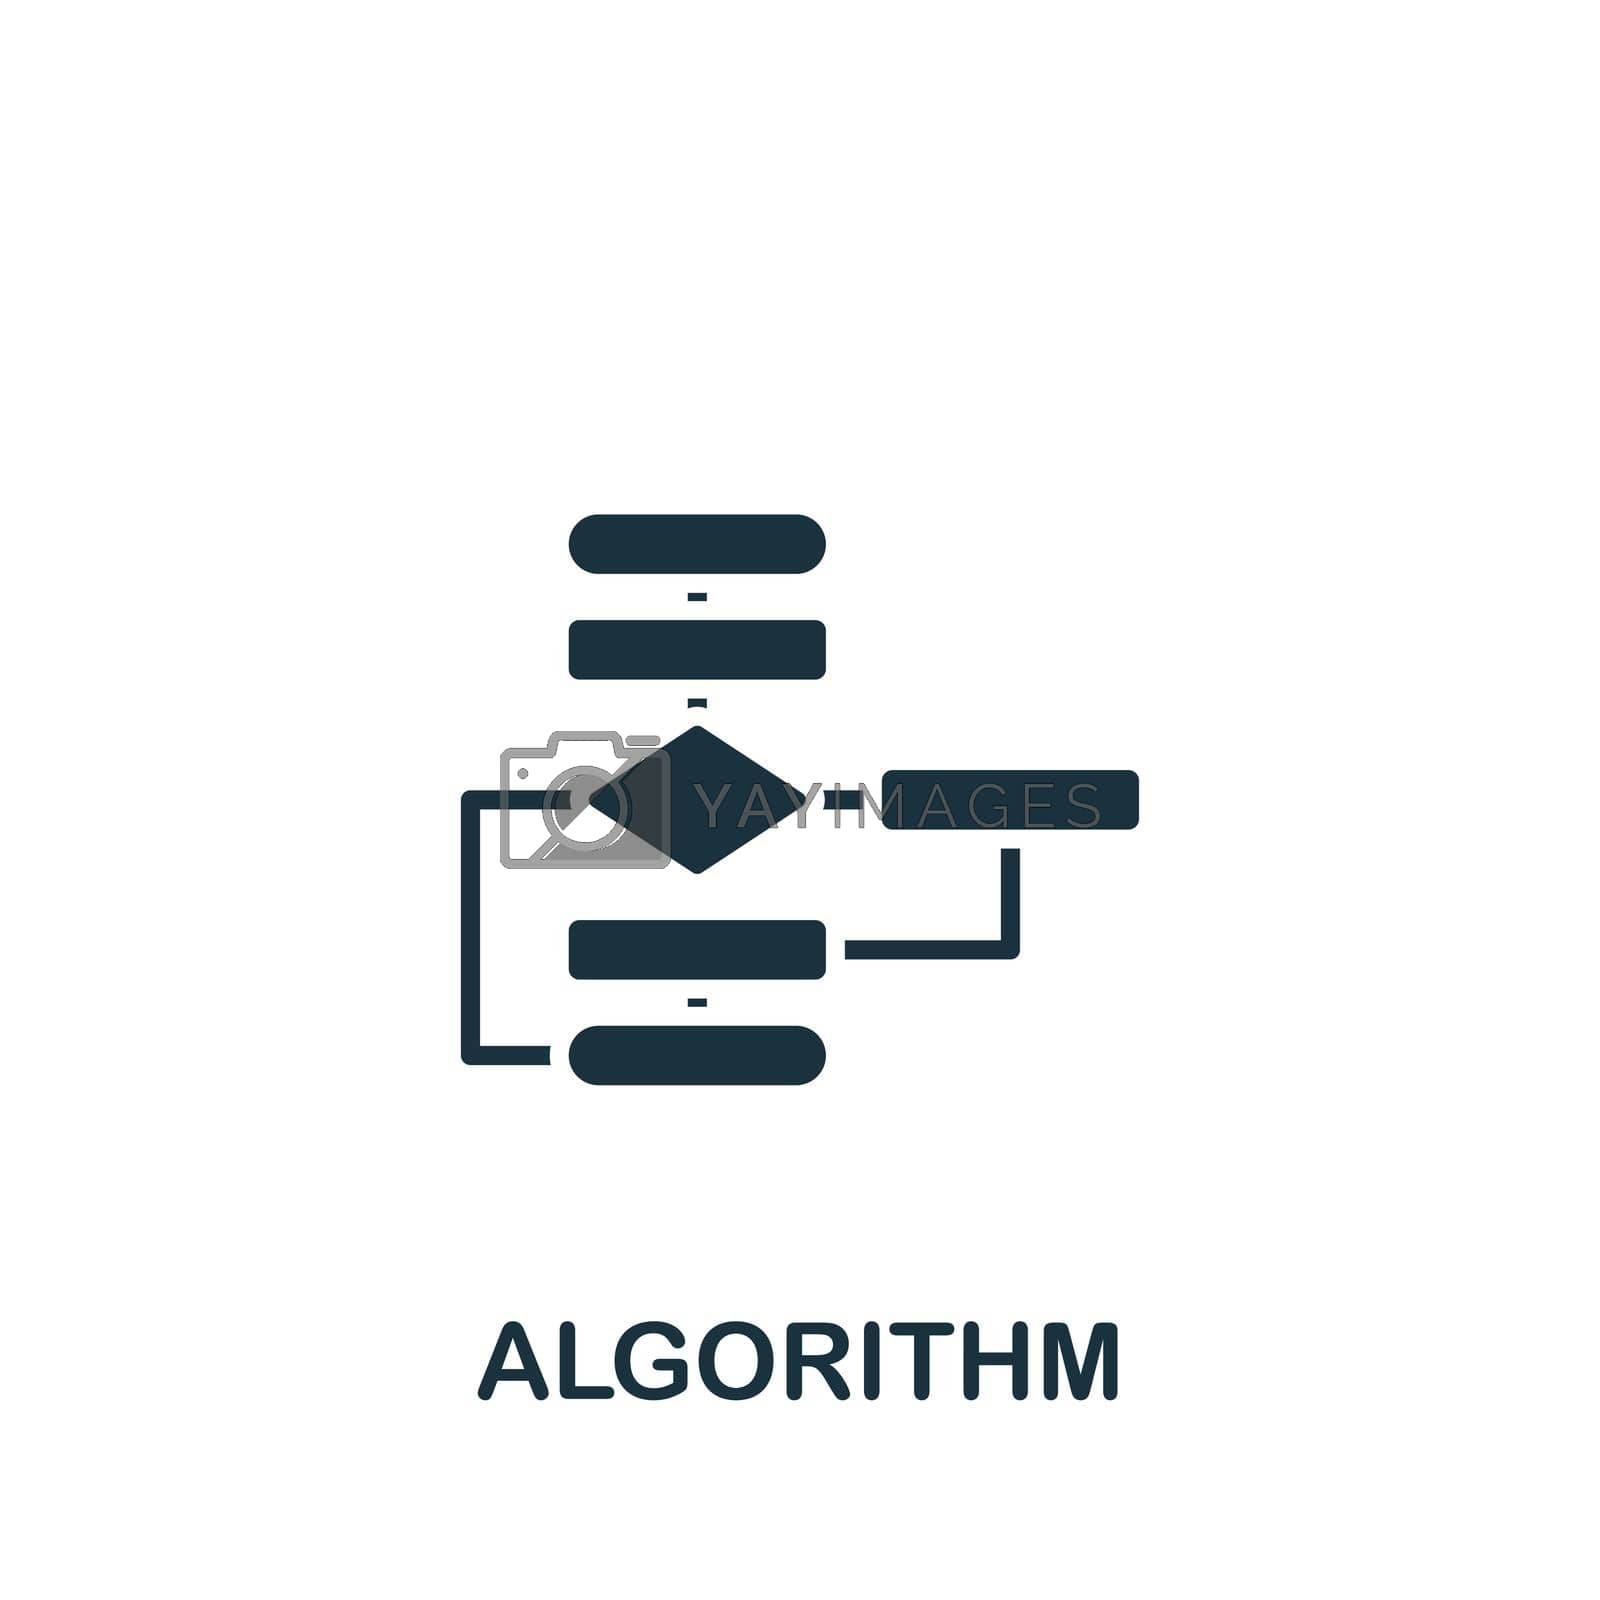 Royalty free image of Algorithm icon. Monochrome simple Psychology icon for templates, web design and infographics by simakovavector